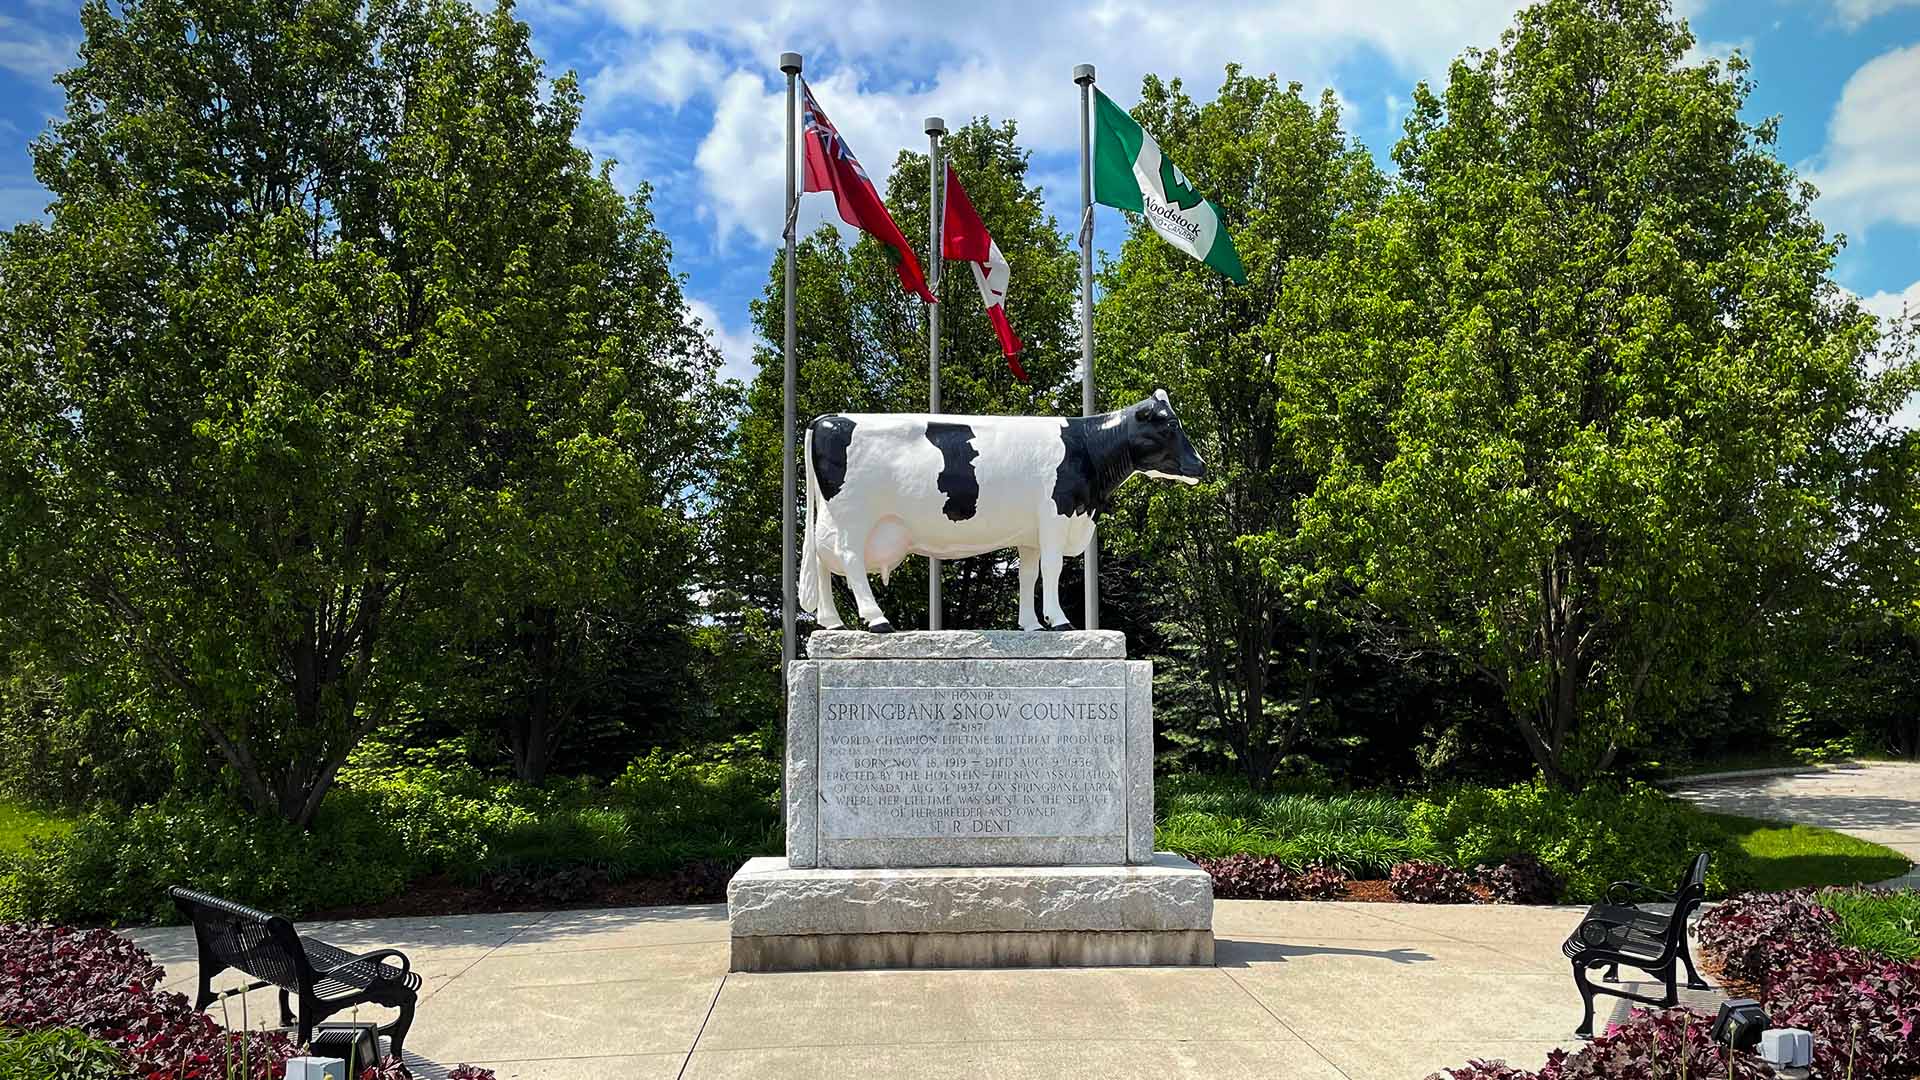 A photo of the Snow Countess cow Statue in Woodstock, Ontario.